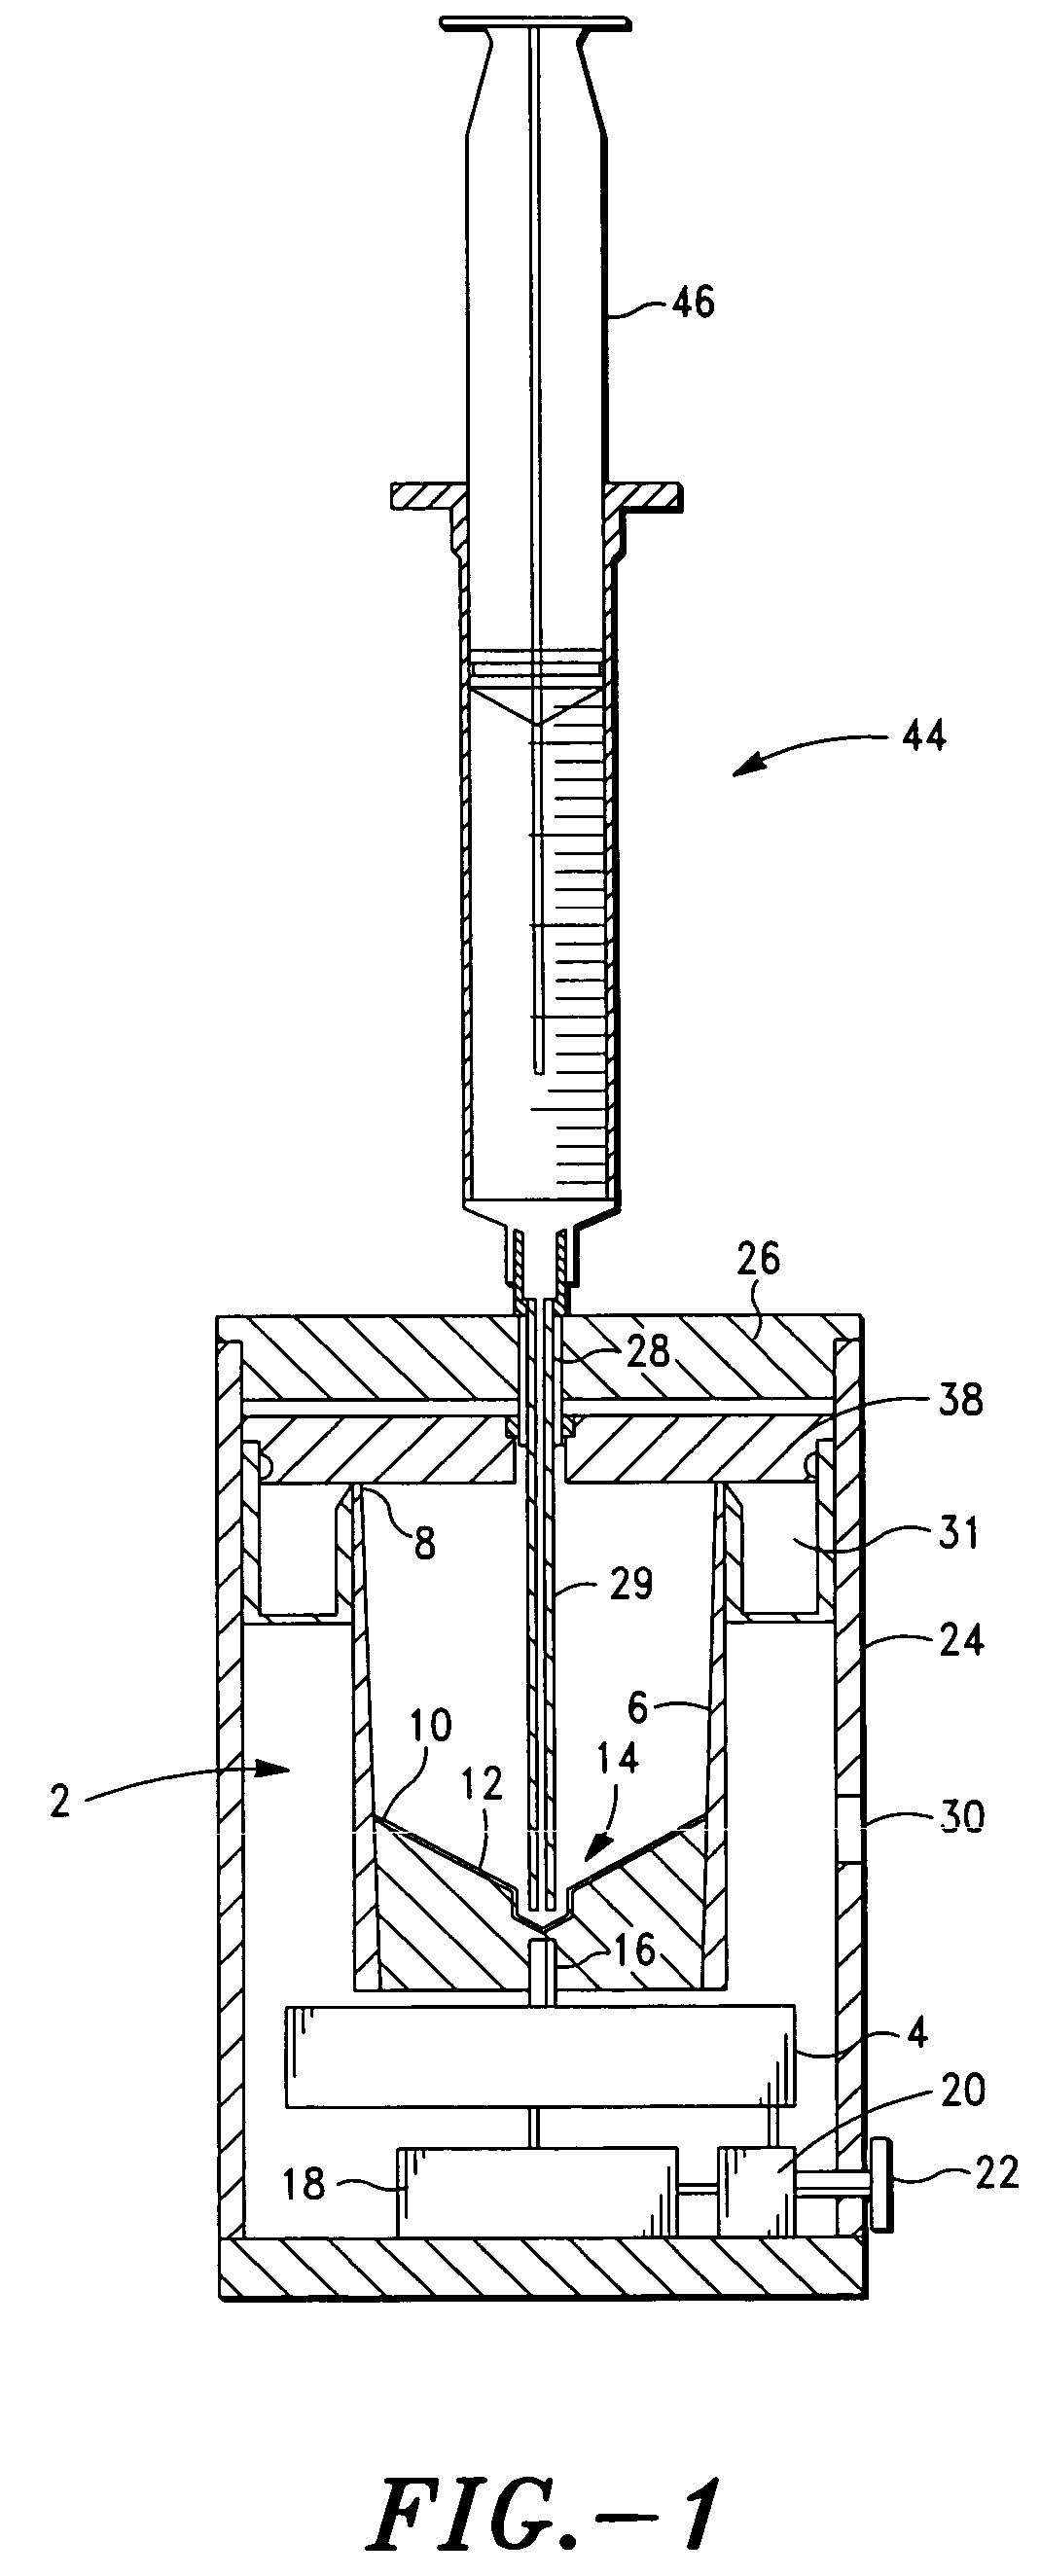 Method and apparatus for preparing platelet rich plasma and concentrates thereof